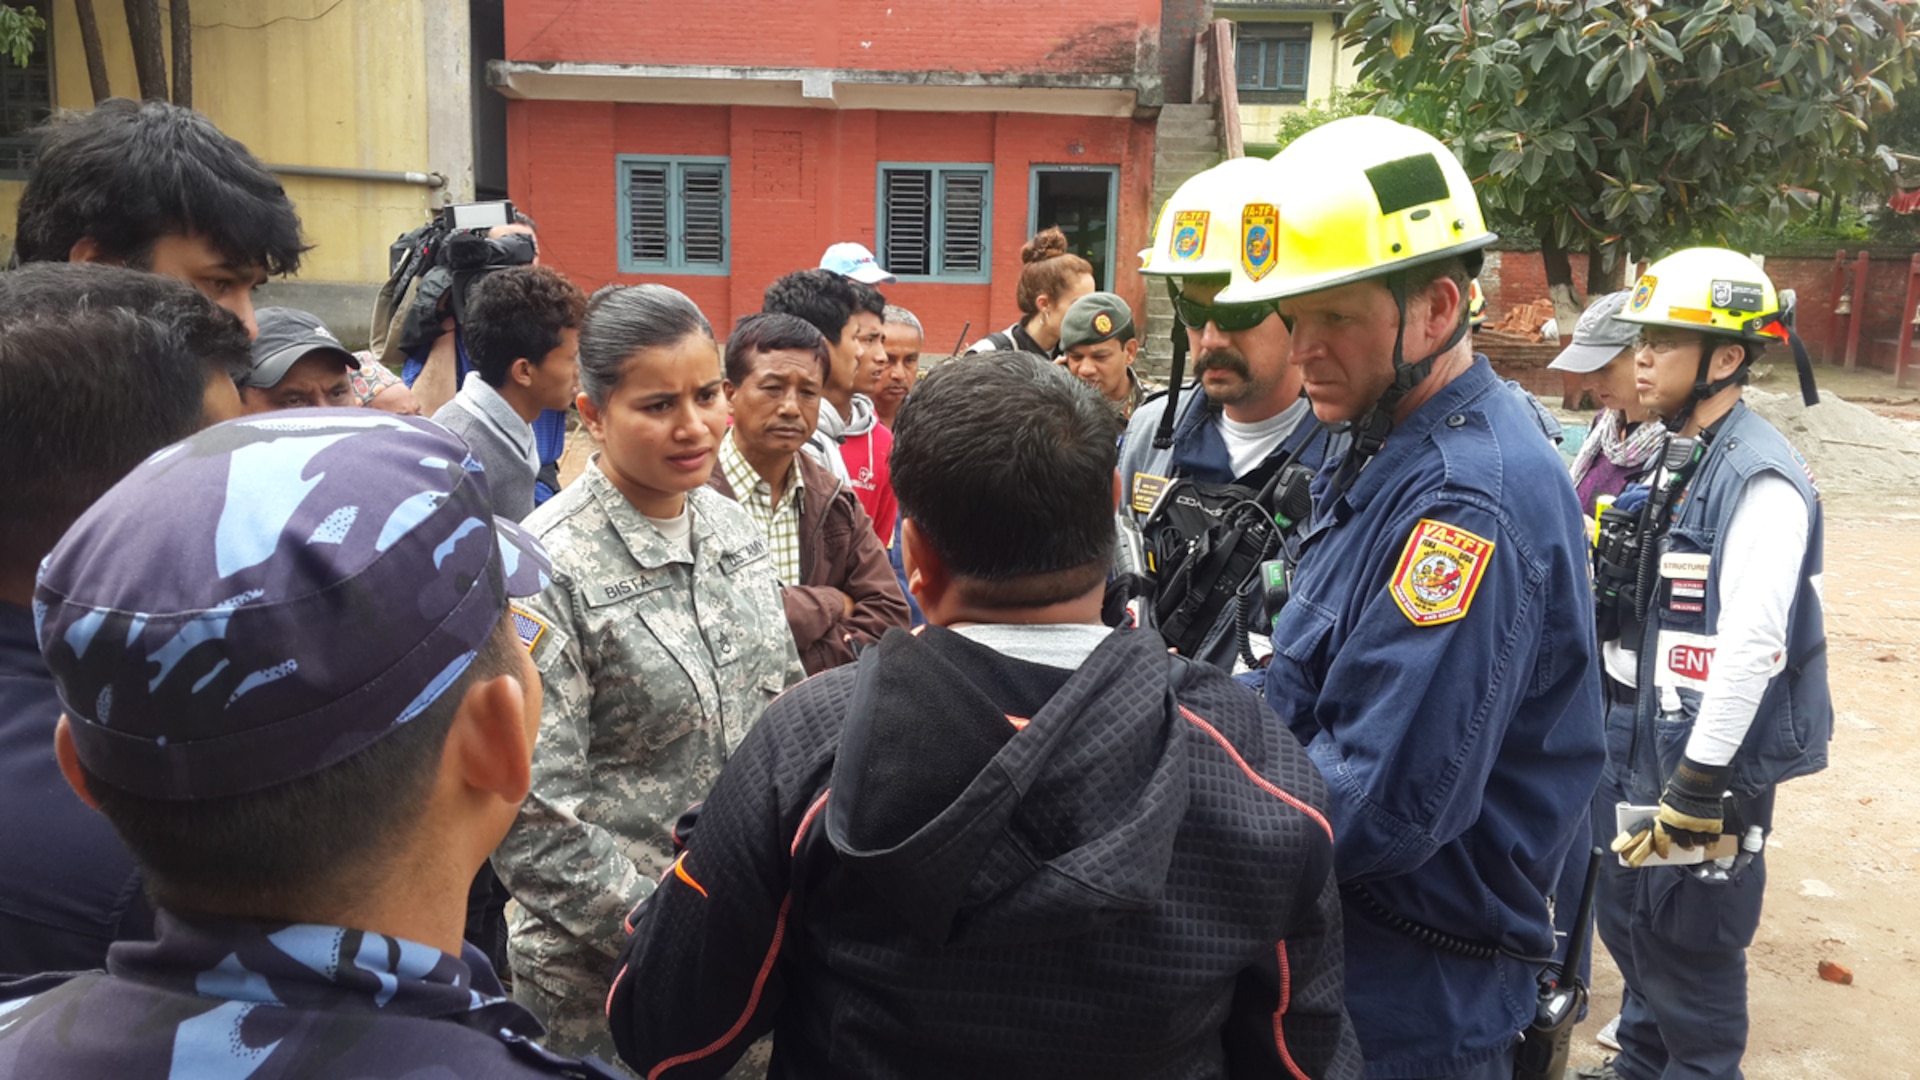 Nepal (Apr. 29, 2015) - A member of the U.S. Civil Military Support Element (CMSE) Nepal talks with USAID Disaster Assistance Response Team (DART) Search and Rescue team from Fairfax County, VA. The CMSE arranged for the SAR team to meet with the Deputy Superintendent Police for Bhaktapur to better synchronize search and rescue efforts.  